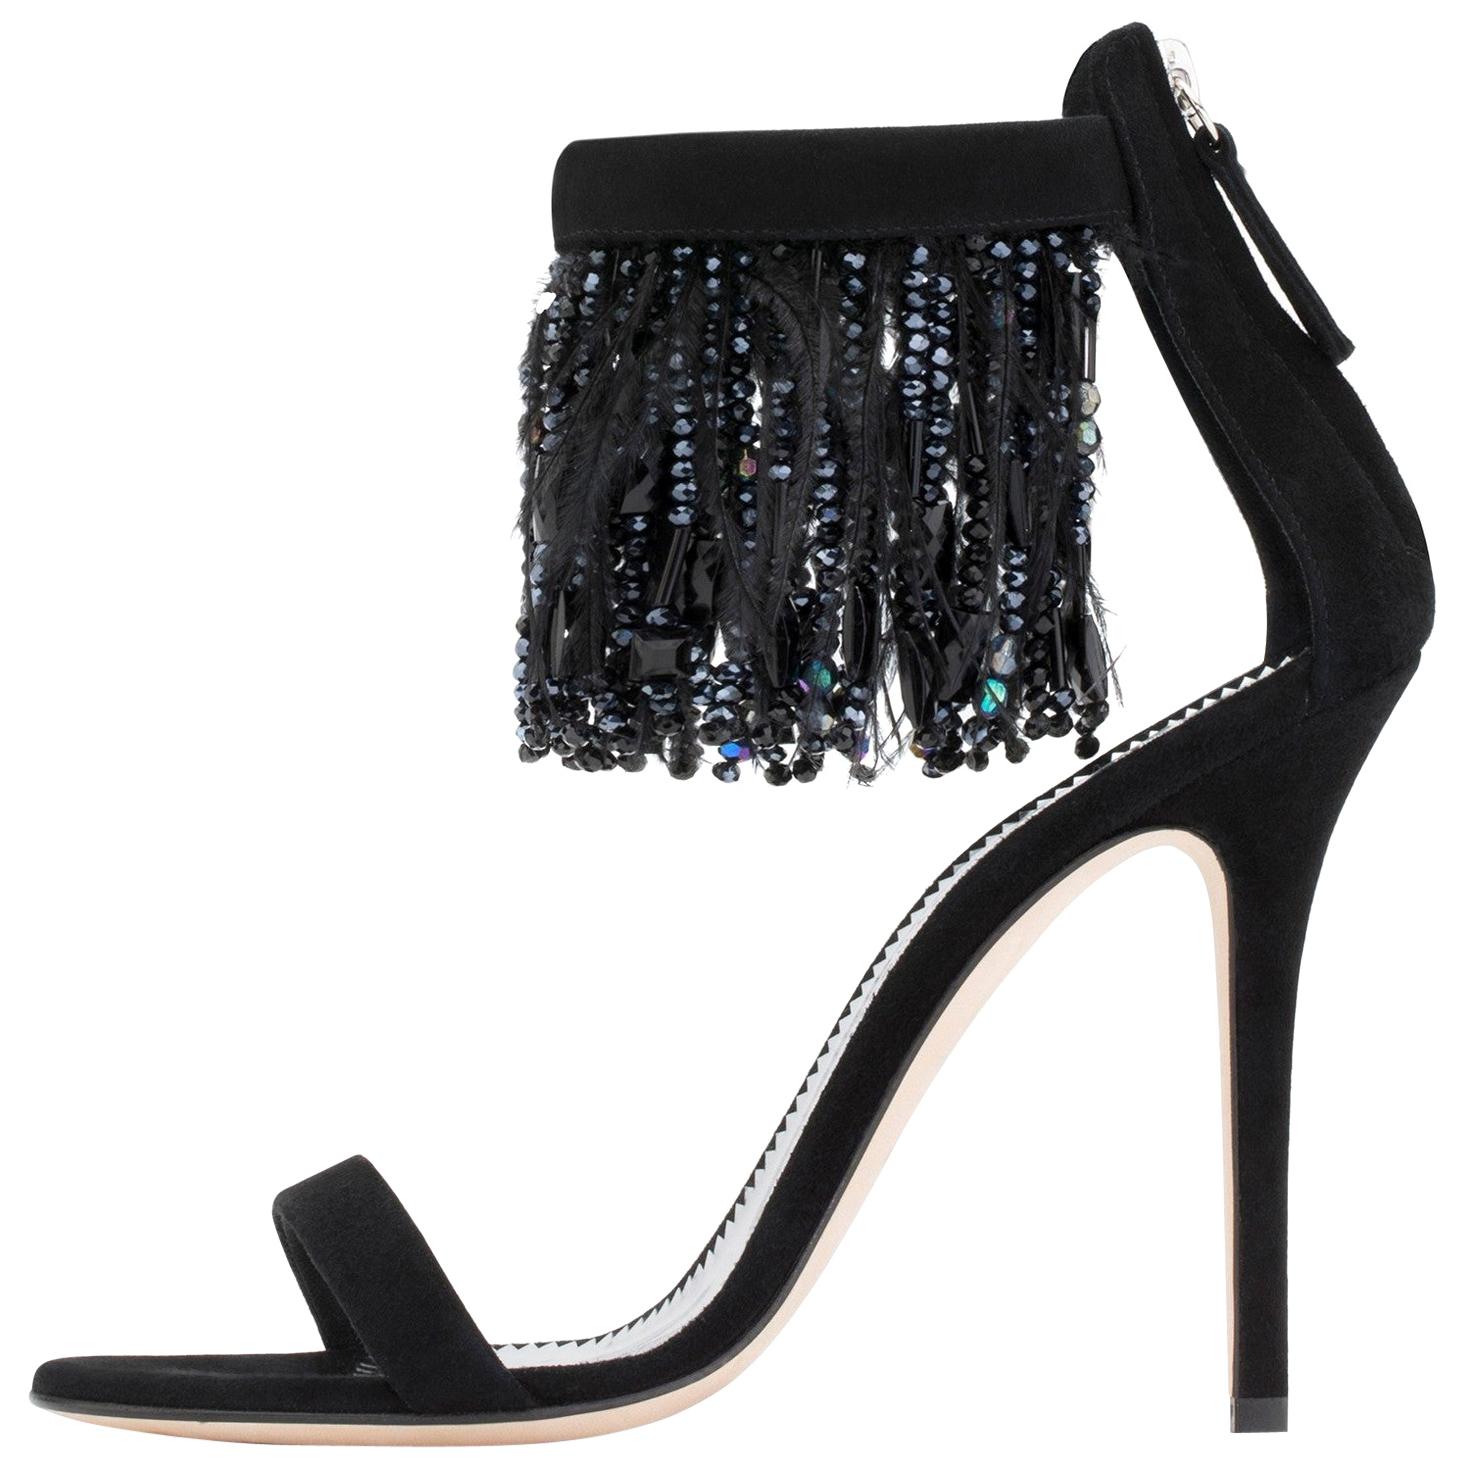 Giuseppe Zanotti NEW Black Suede Bead Feather Evening Sandals Heels in Box 